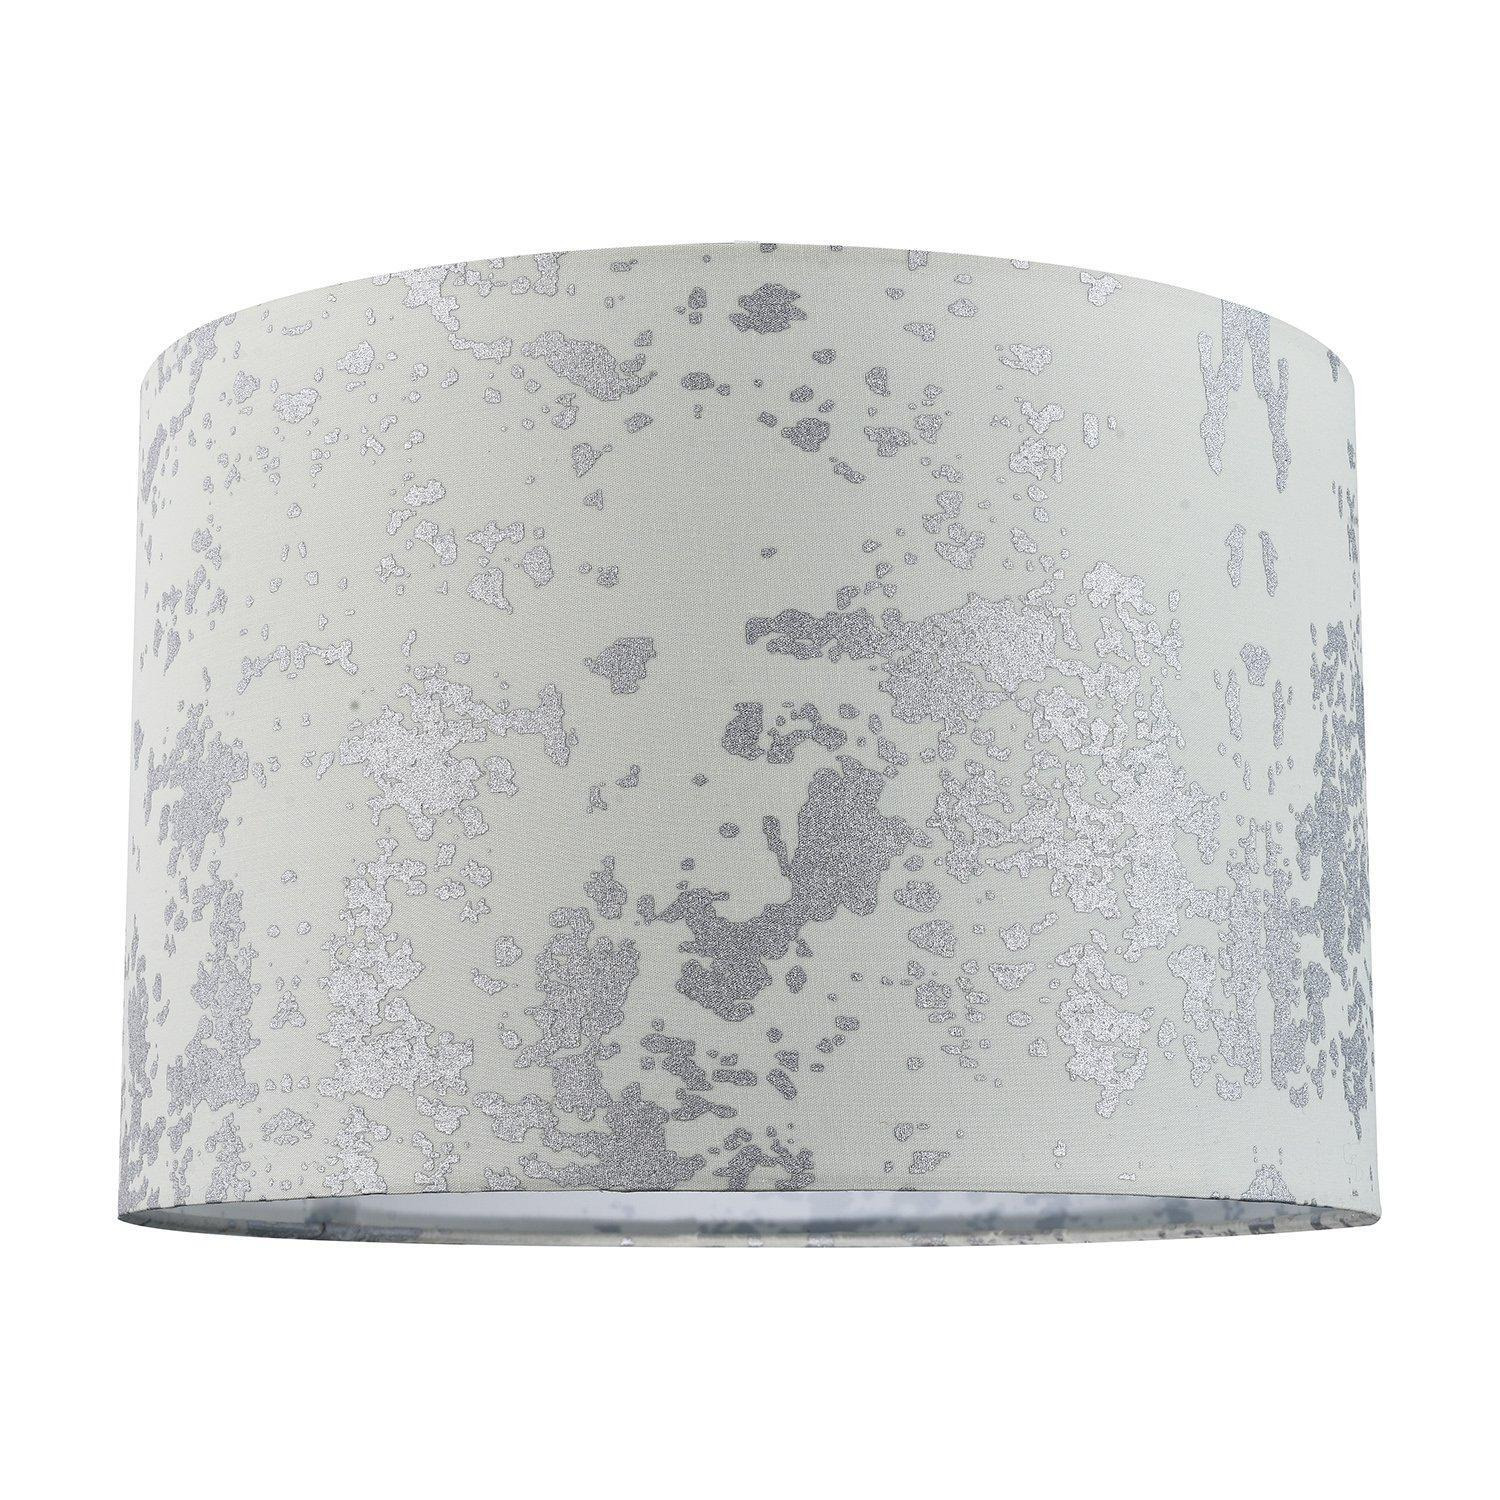 Modern Cotton Fabric Lamp Shade with Delicate Foil Decor for Table or Ceiling - image 1